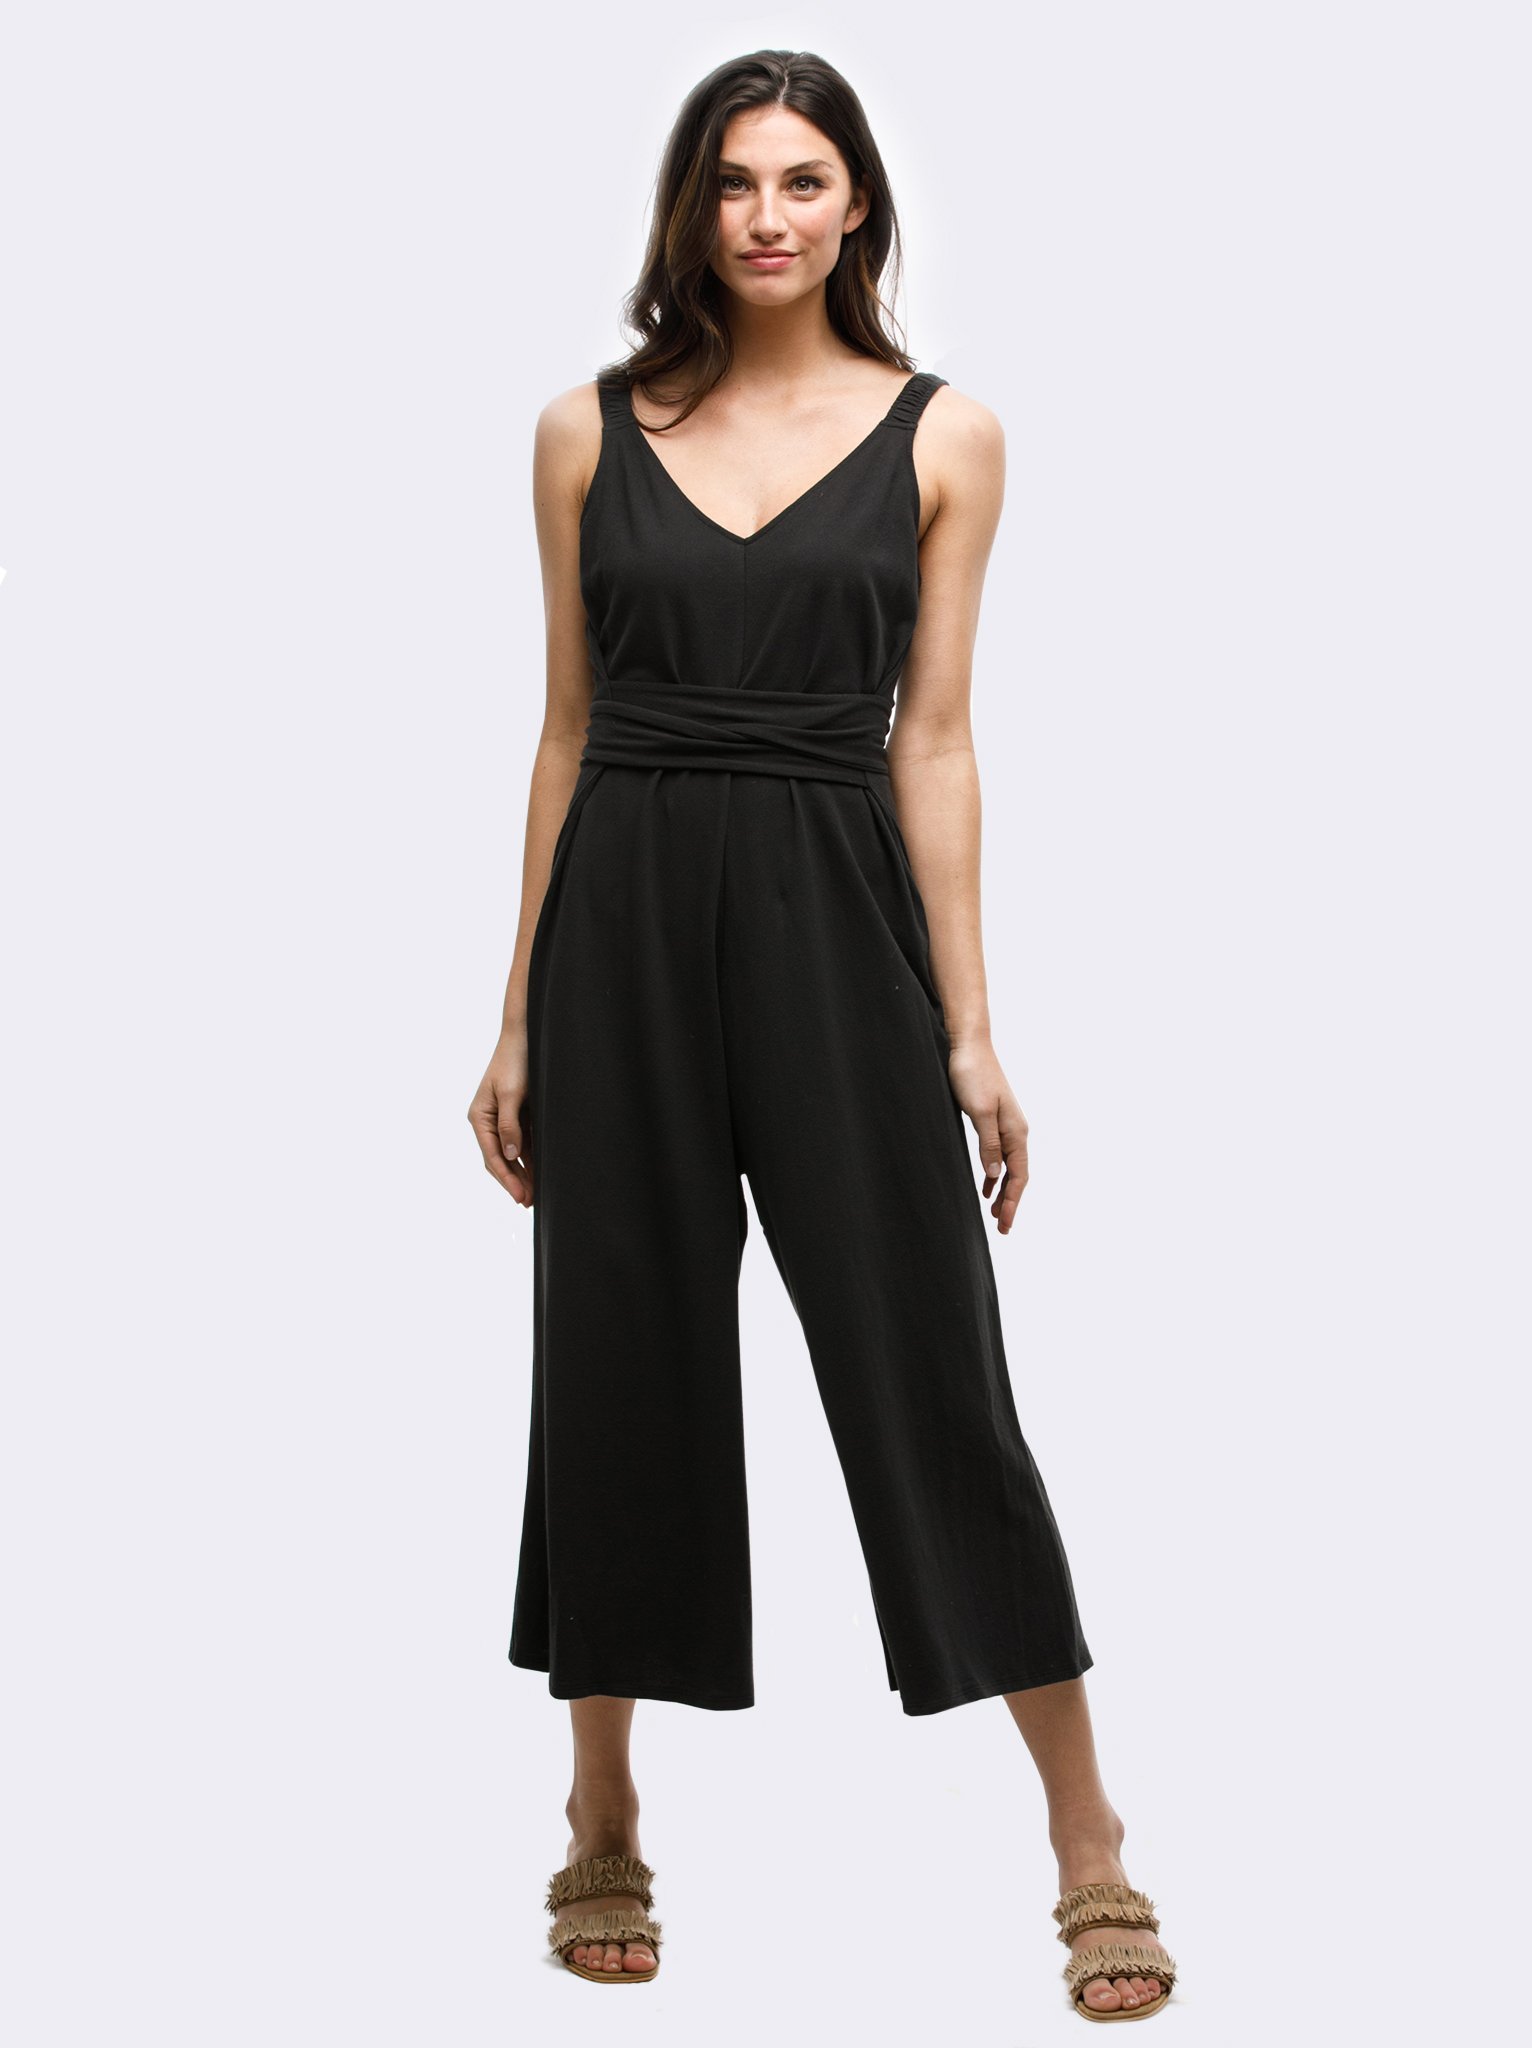 Ethical Fashion: A Guide to Purchasing Jumpsuits — The Honest Consumer